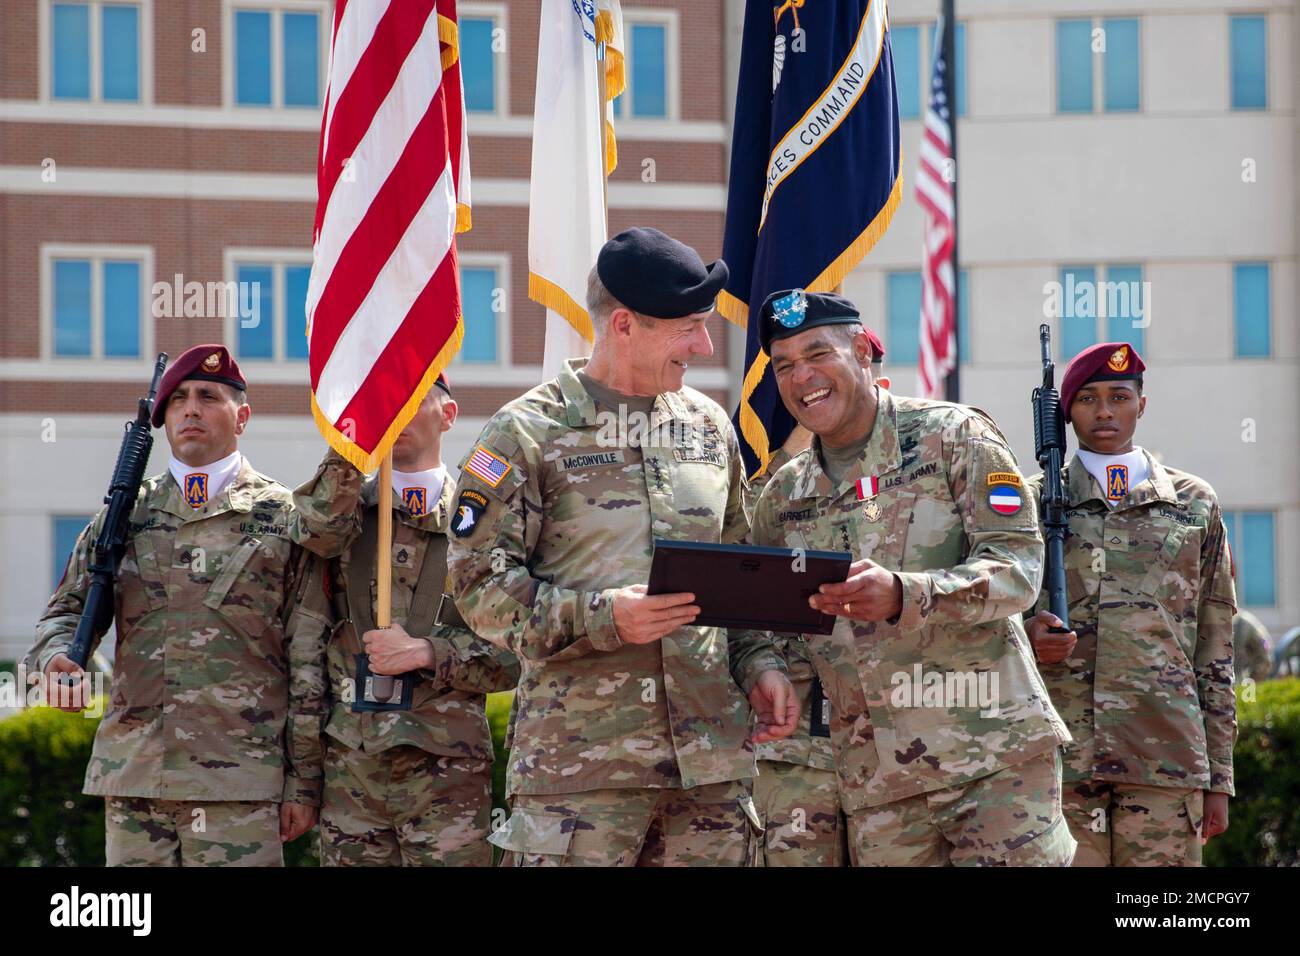 Gen. James C. McConville, 40th Chief of Staff of the Army, presents Gen. Michael X. Garrett, United State Army Forces Command (FORSCOM), outgoing Commanding General, with a certificate of appreciation from the President of the United States for service in the Armed Forces of the United States of America, on Fort Bragg, N.C. July 8, 2022. Garrett’s 38- year career culminated as the 23rd Commanding General for FORSCOM. Stock Photo